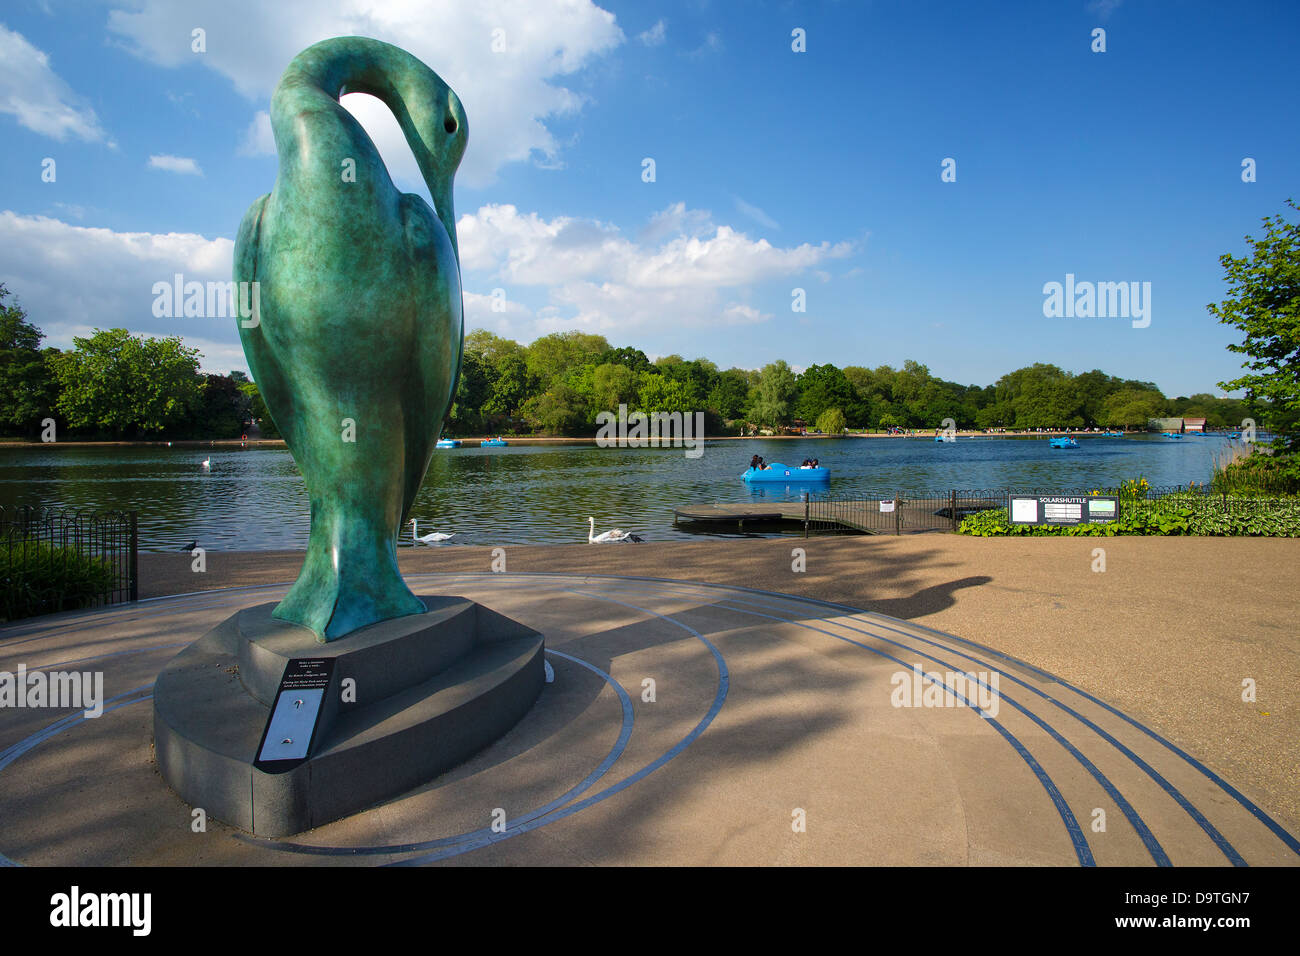 Isis sculpture by Simon Gudgeon (2009) by the Long Water lake Hyde Park, London, England UK Stock Photo